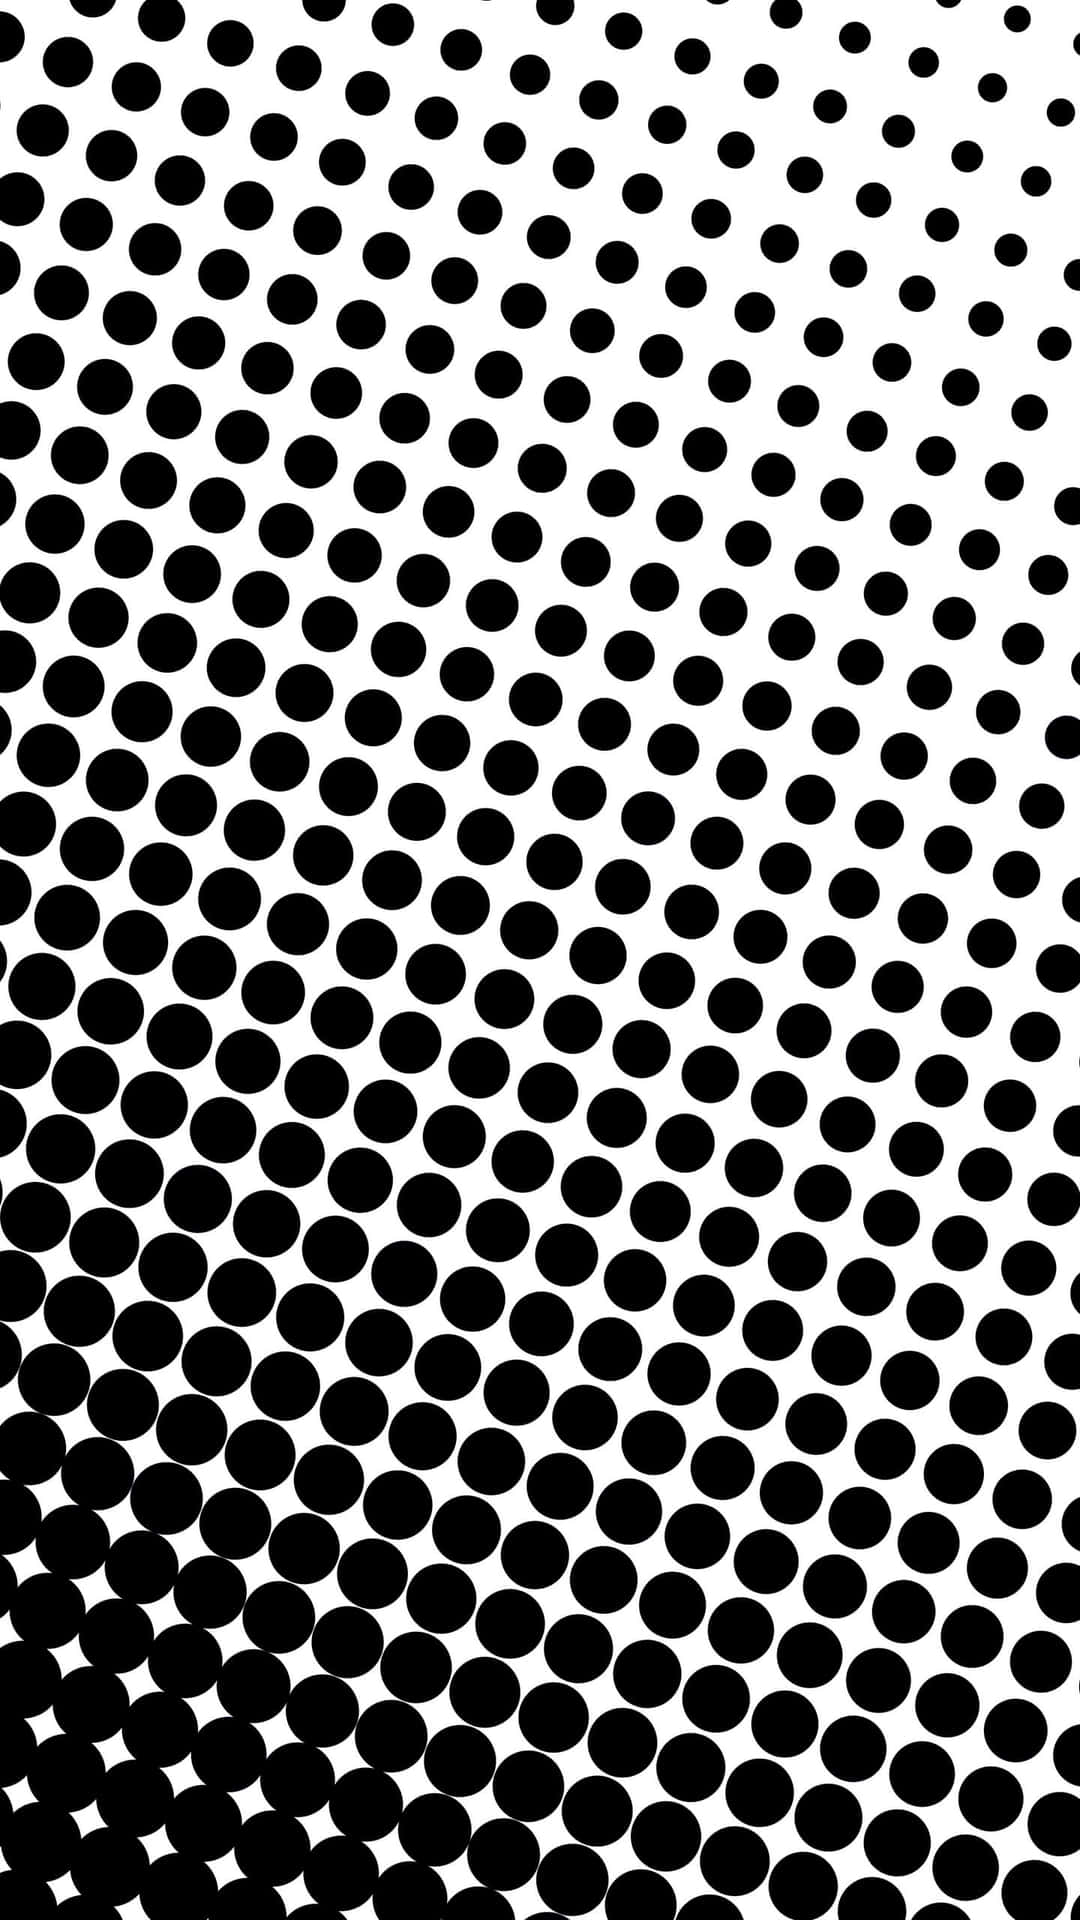 An abstract pattern of black and white dots Wallpaper